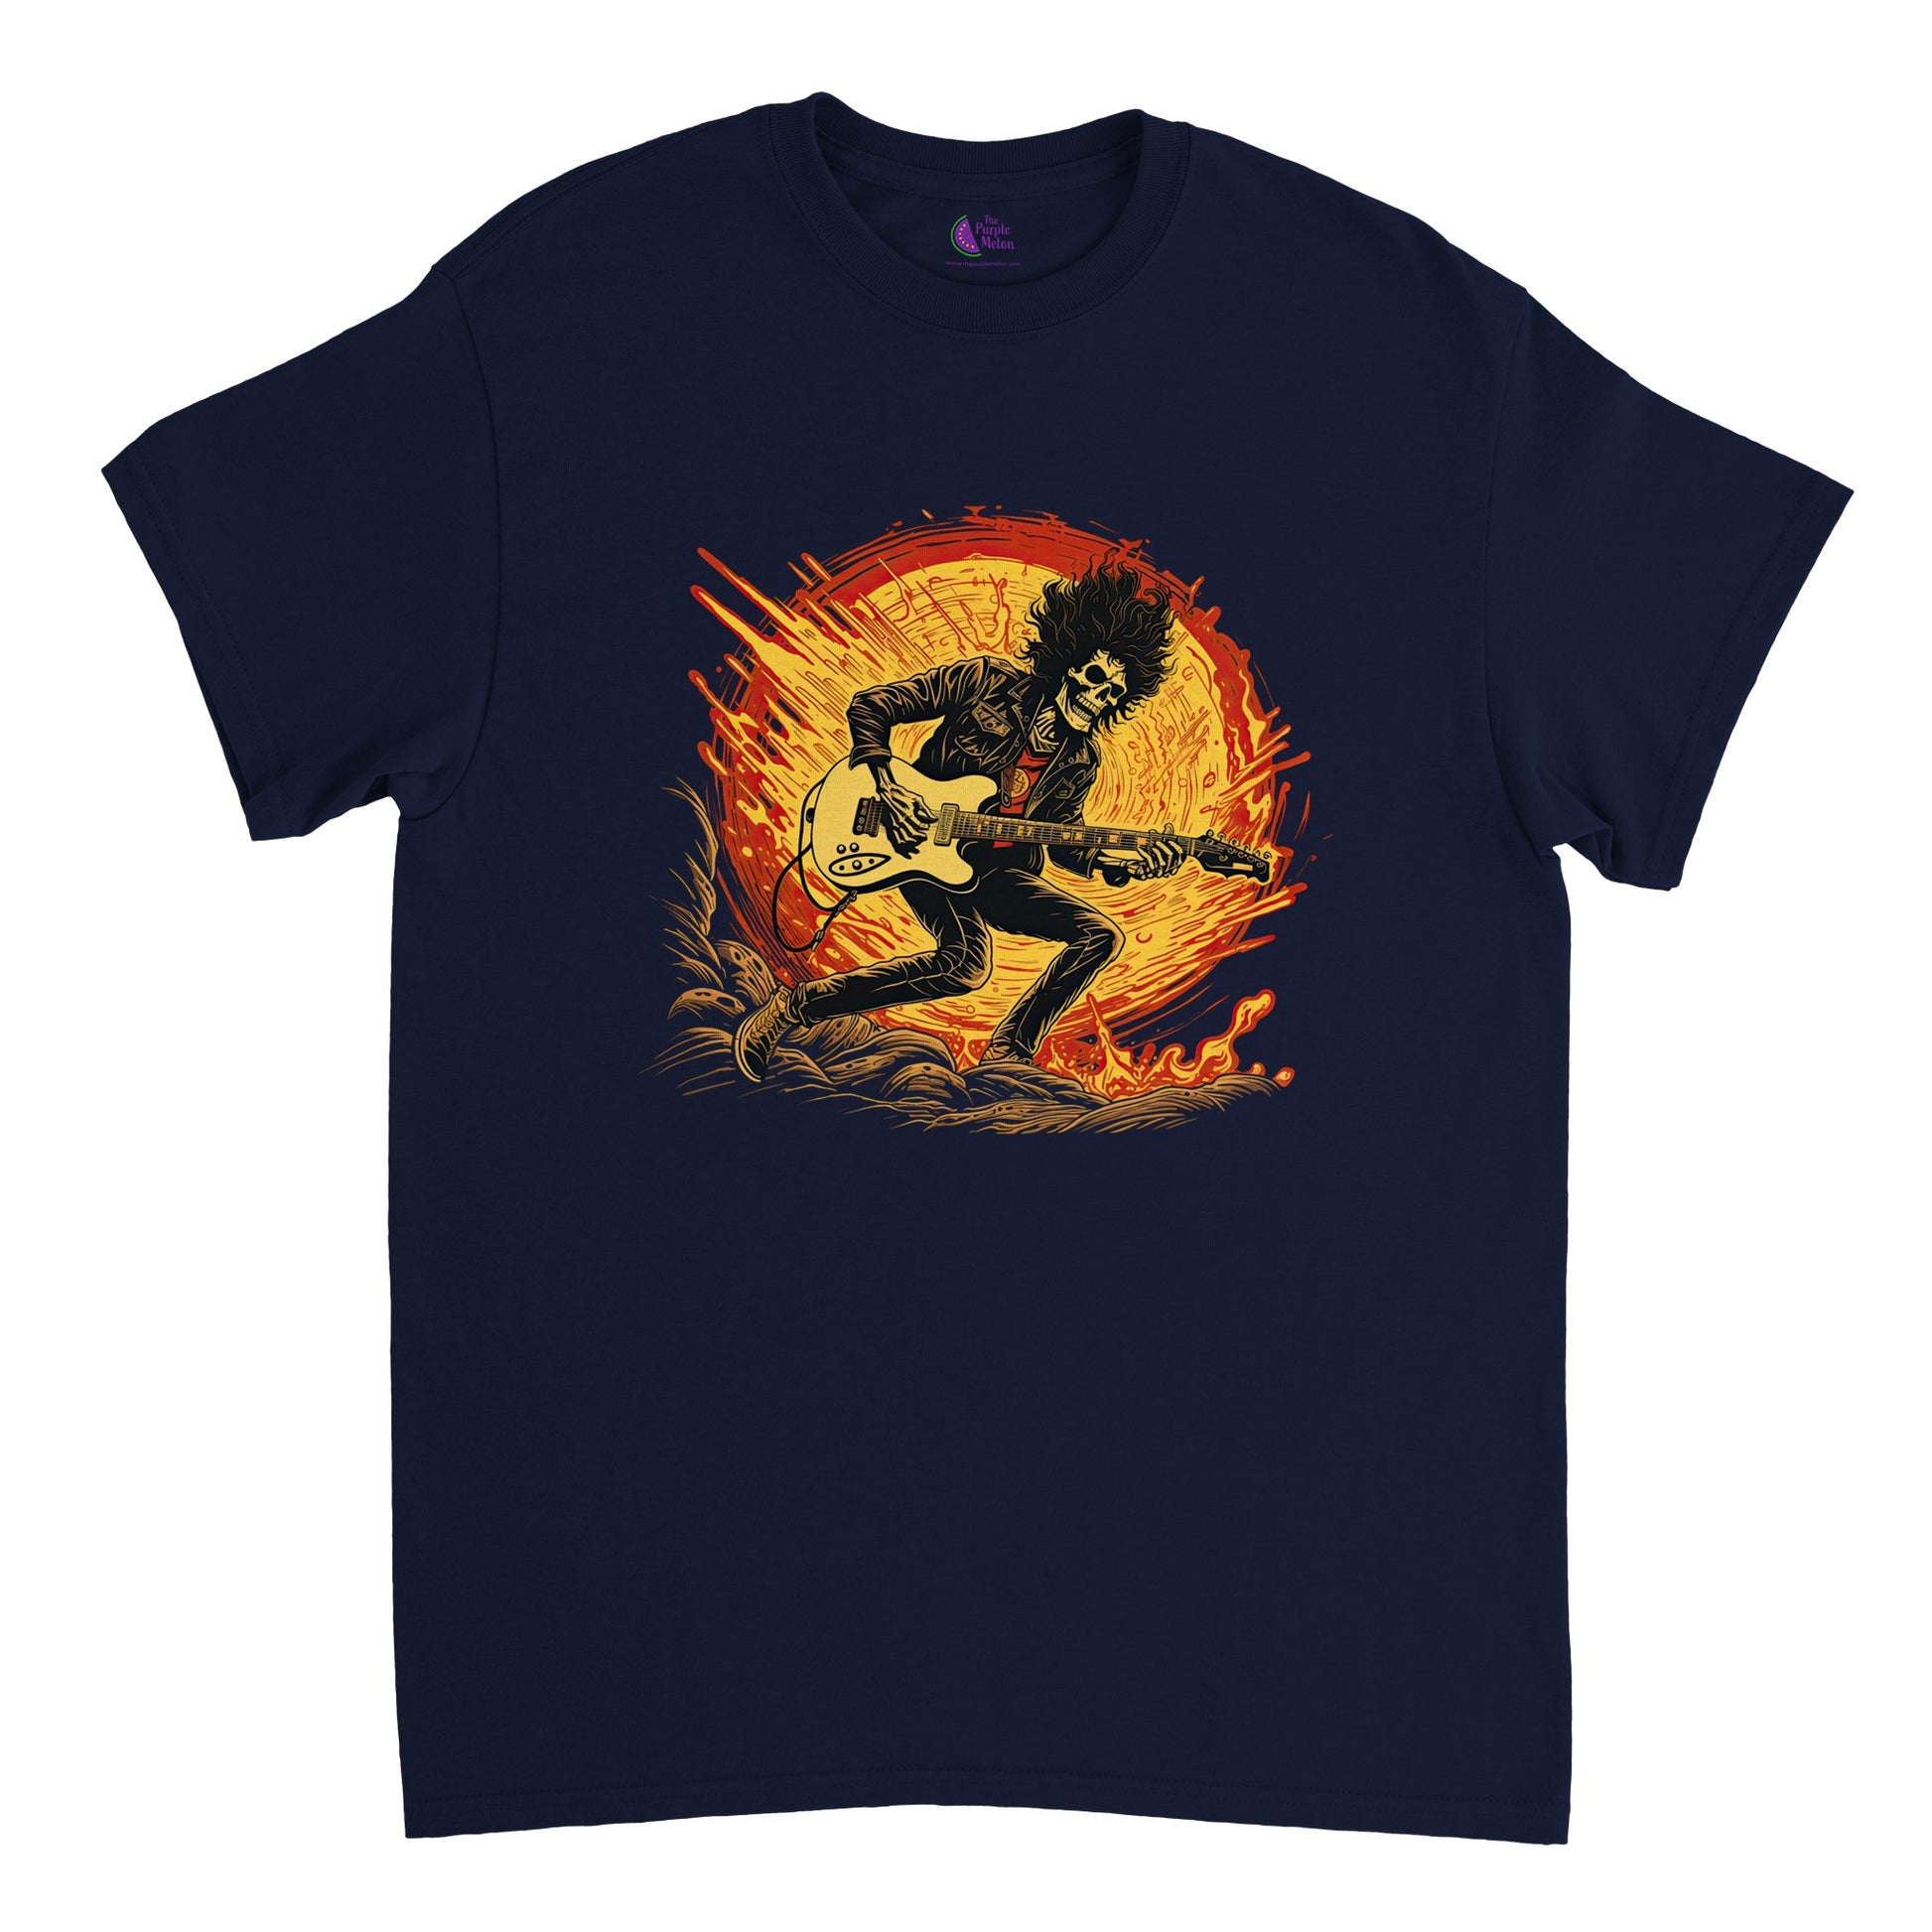 Navy blue t-shirt with a crazy skeleton guitarist print